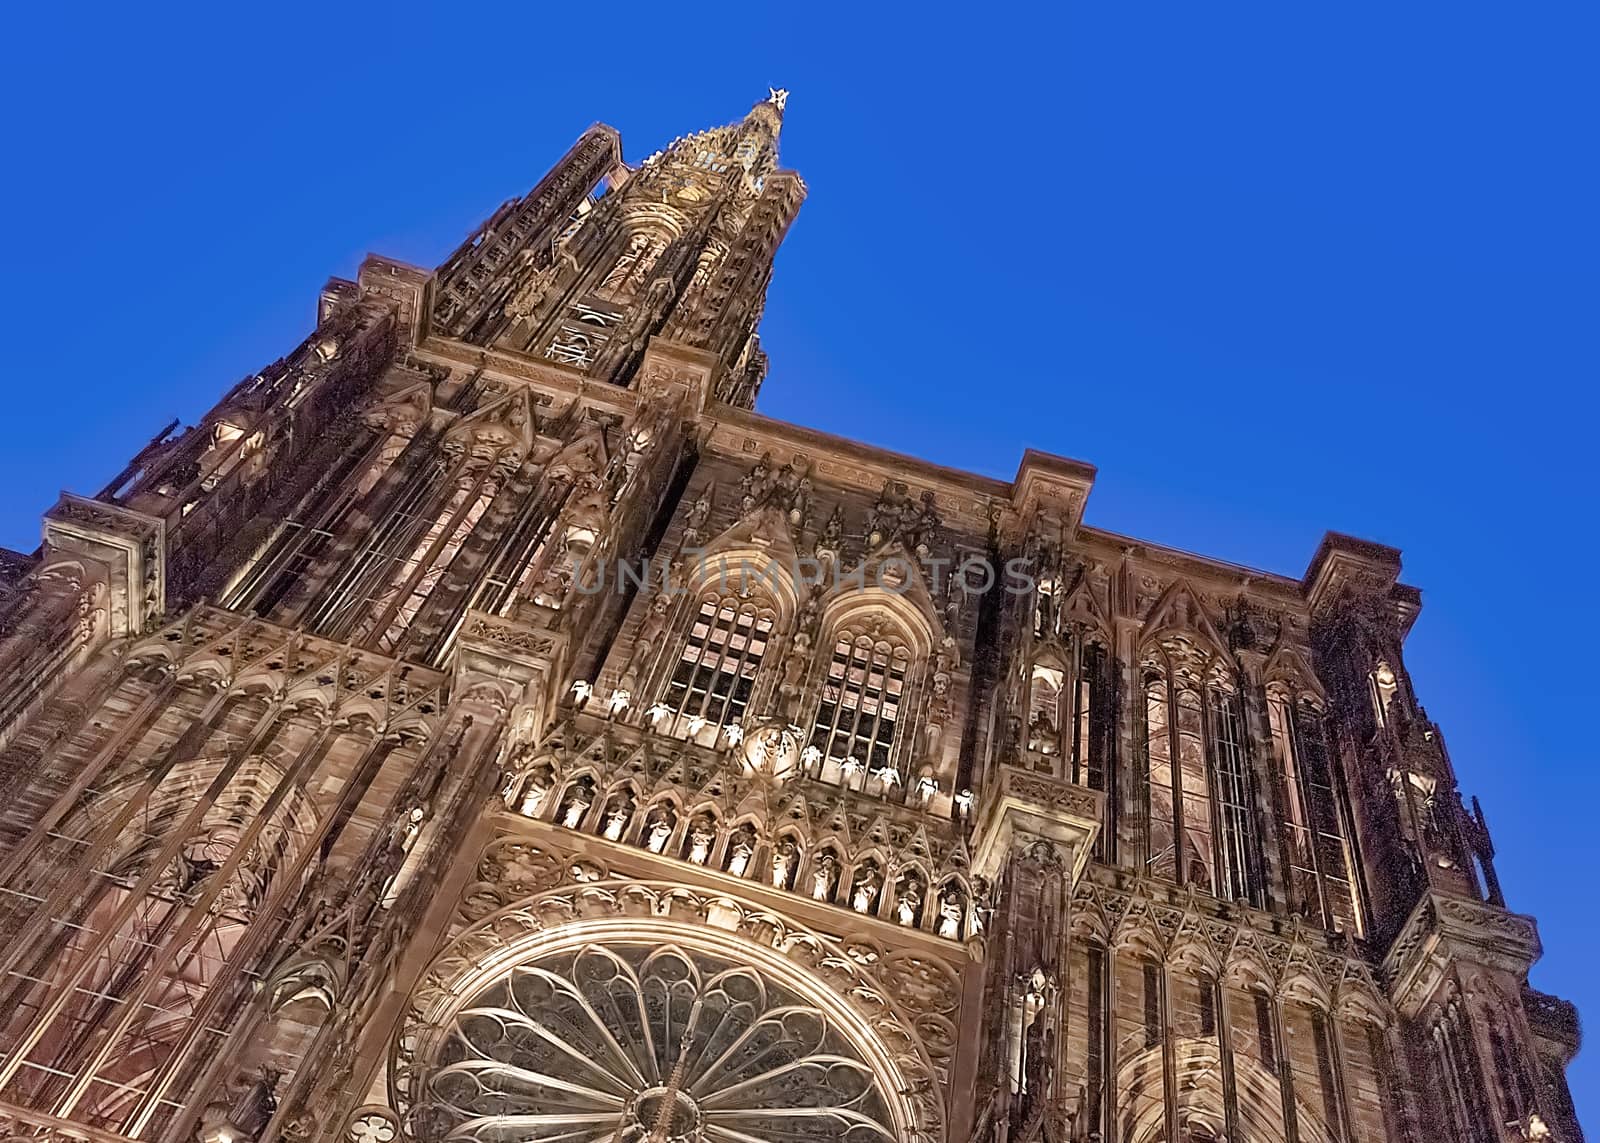 France, Alsace - March 2018: Illuminated facade of the cathedral of Notre Dame in Strasbourg at night